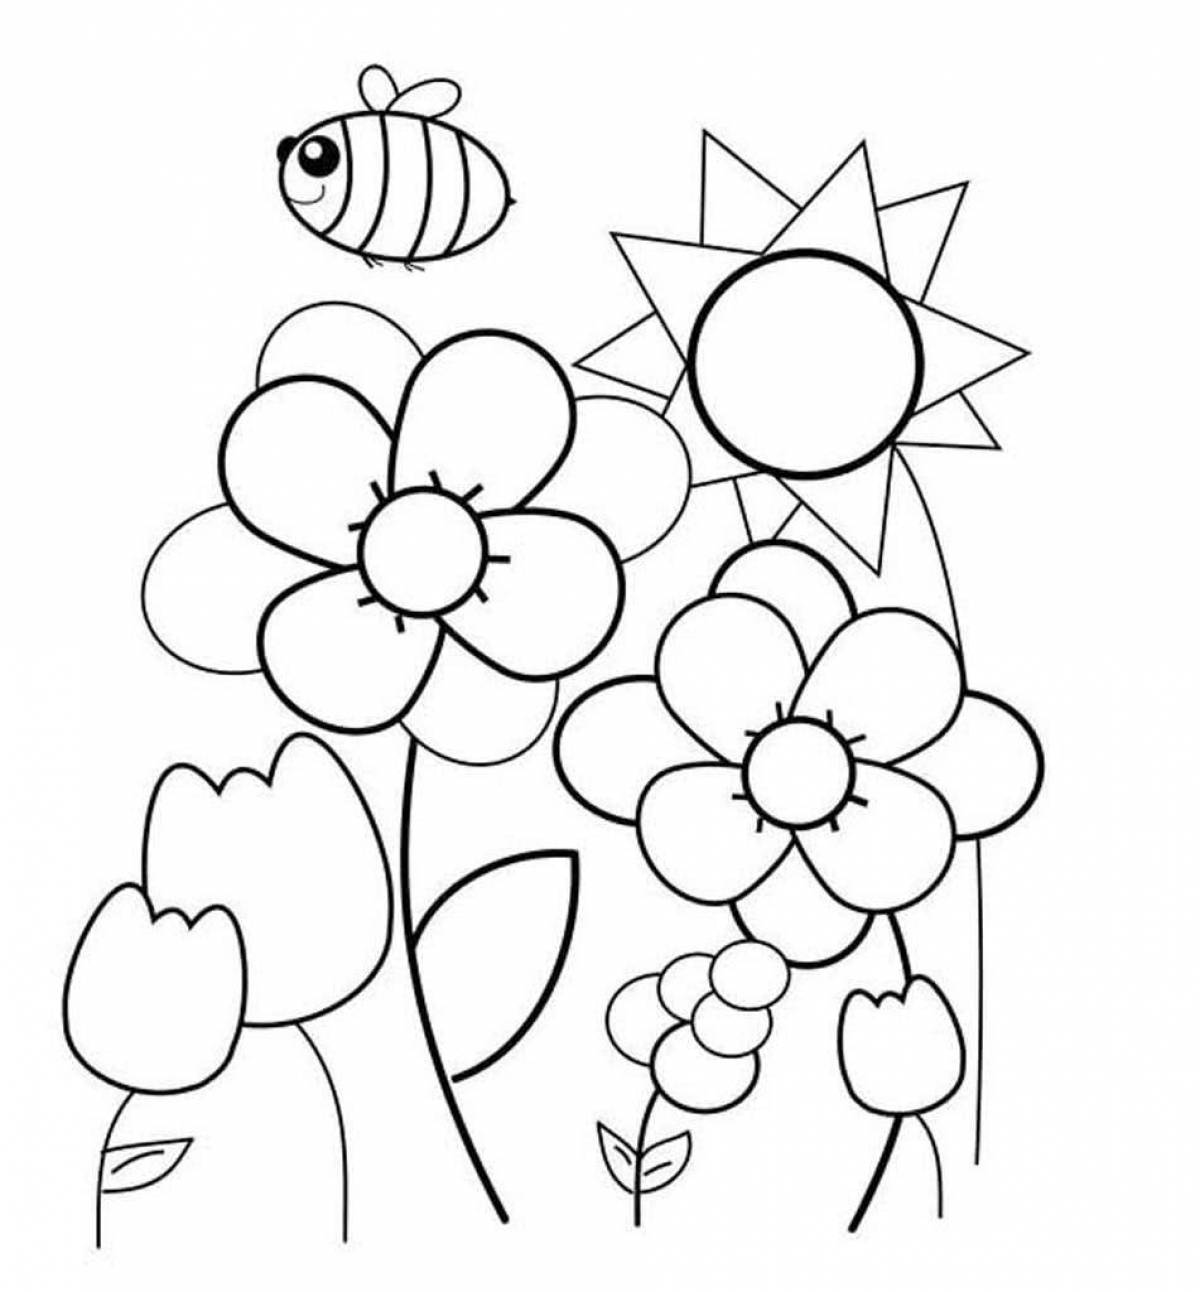 Outstanding flower coloring book for 4-5 year olds